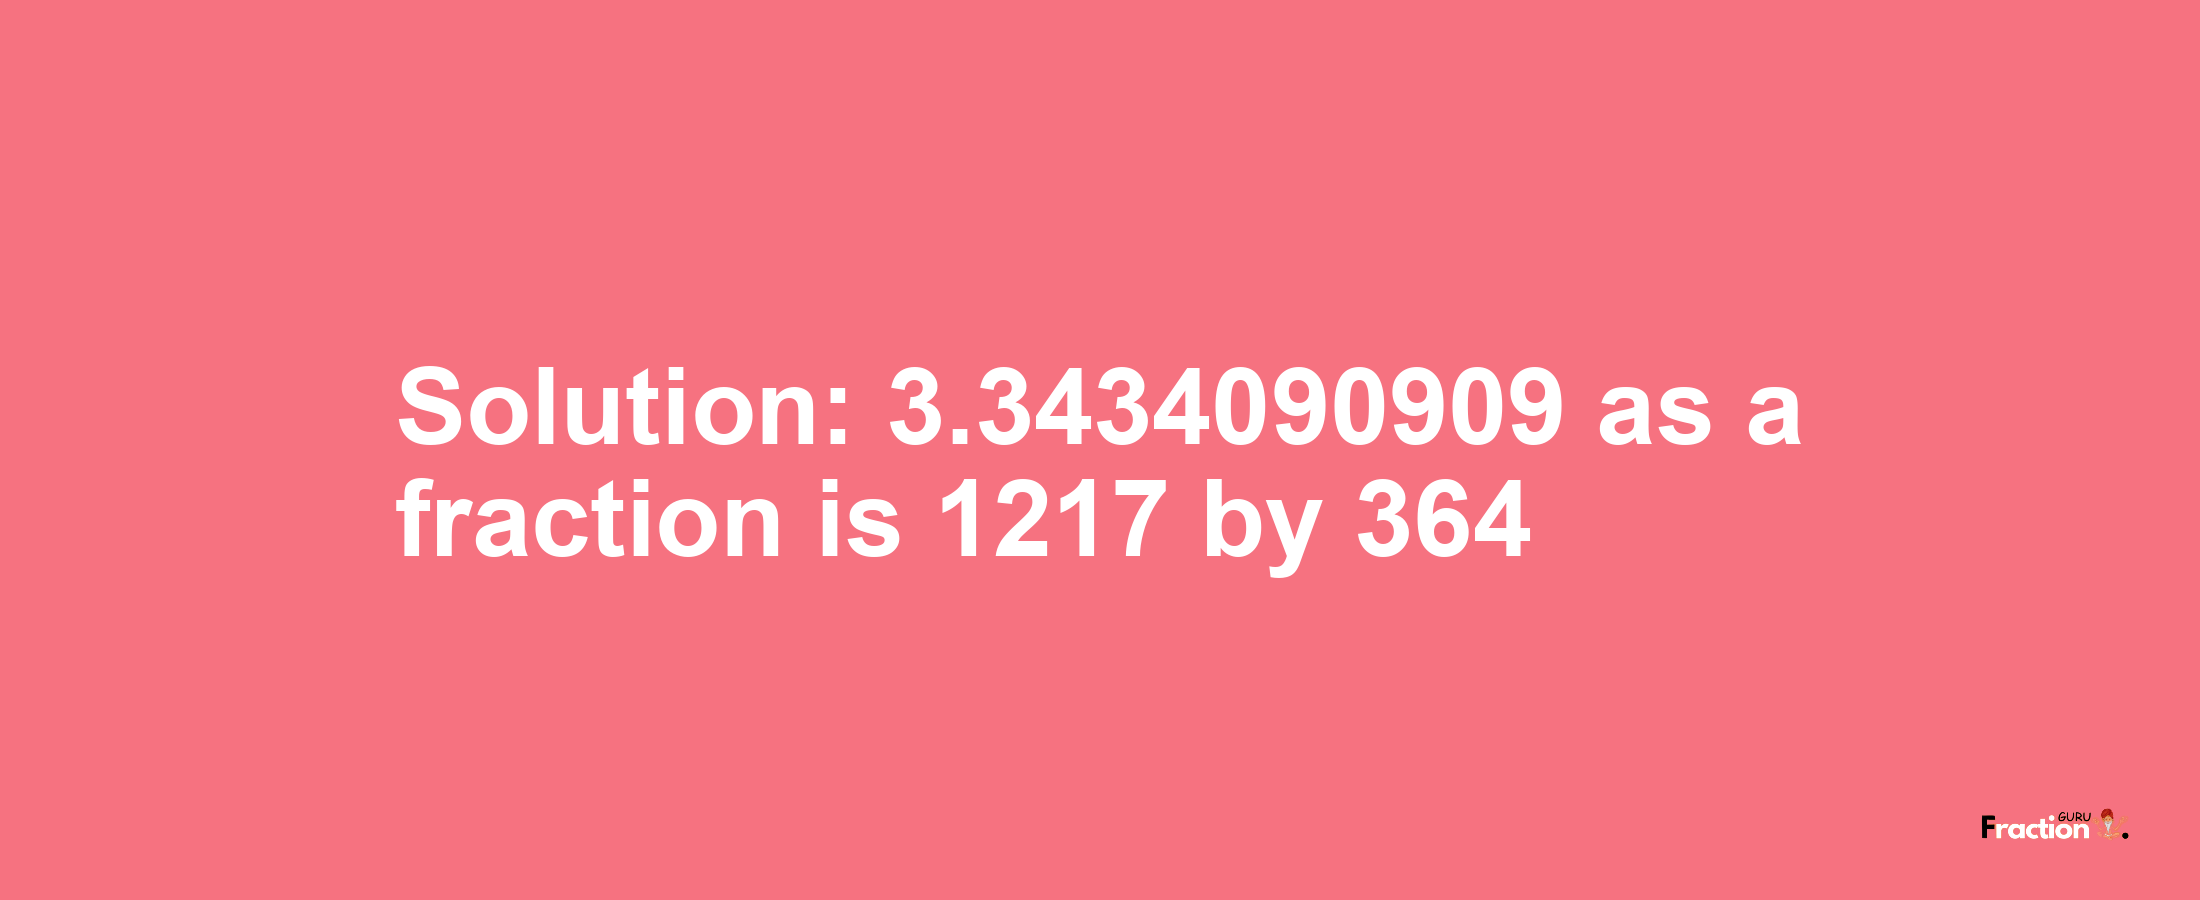 Solution:3.3434090909 as a fraction is 1217/364